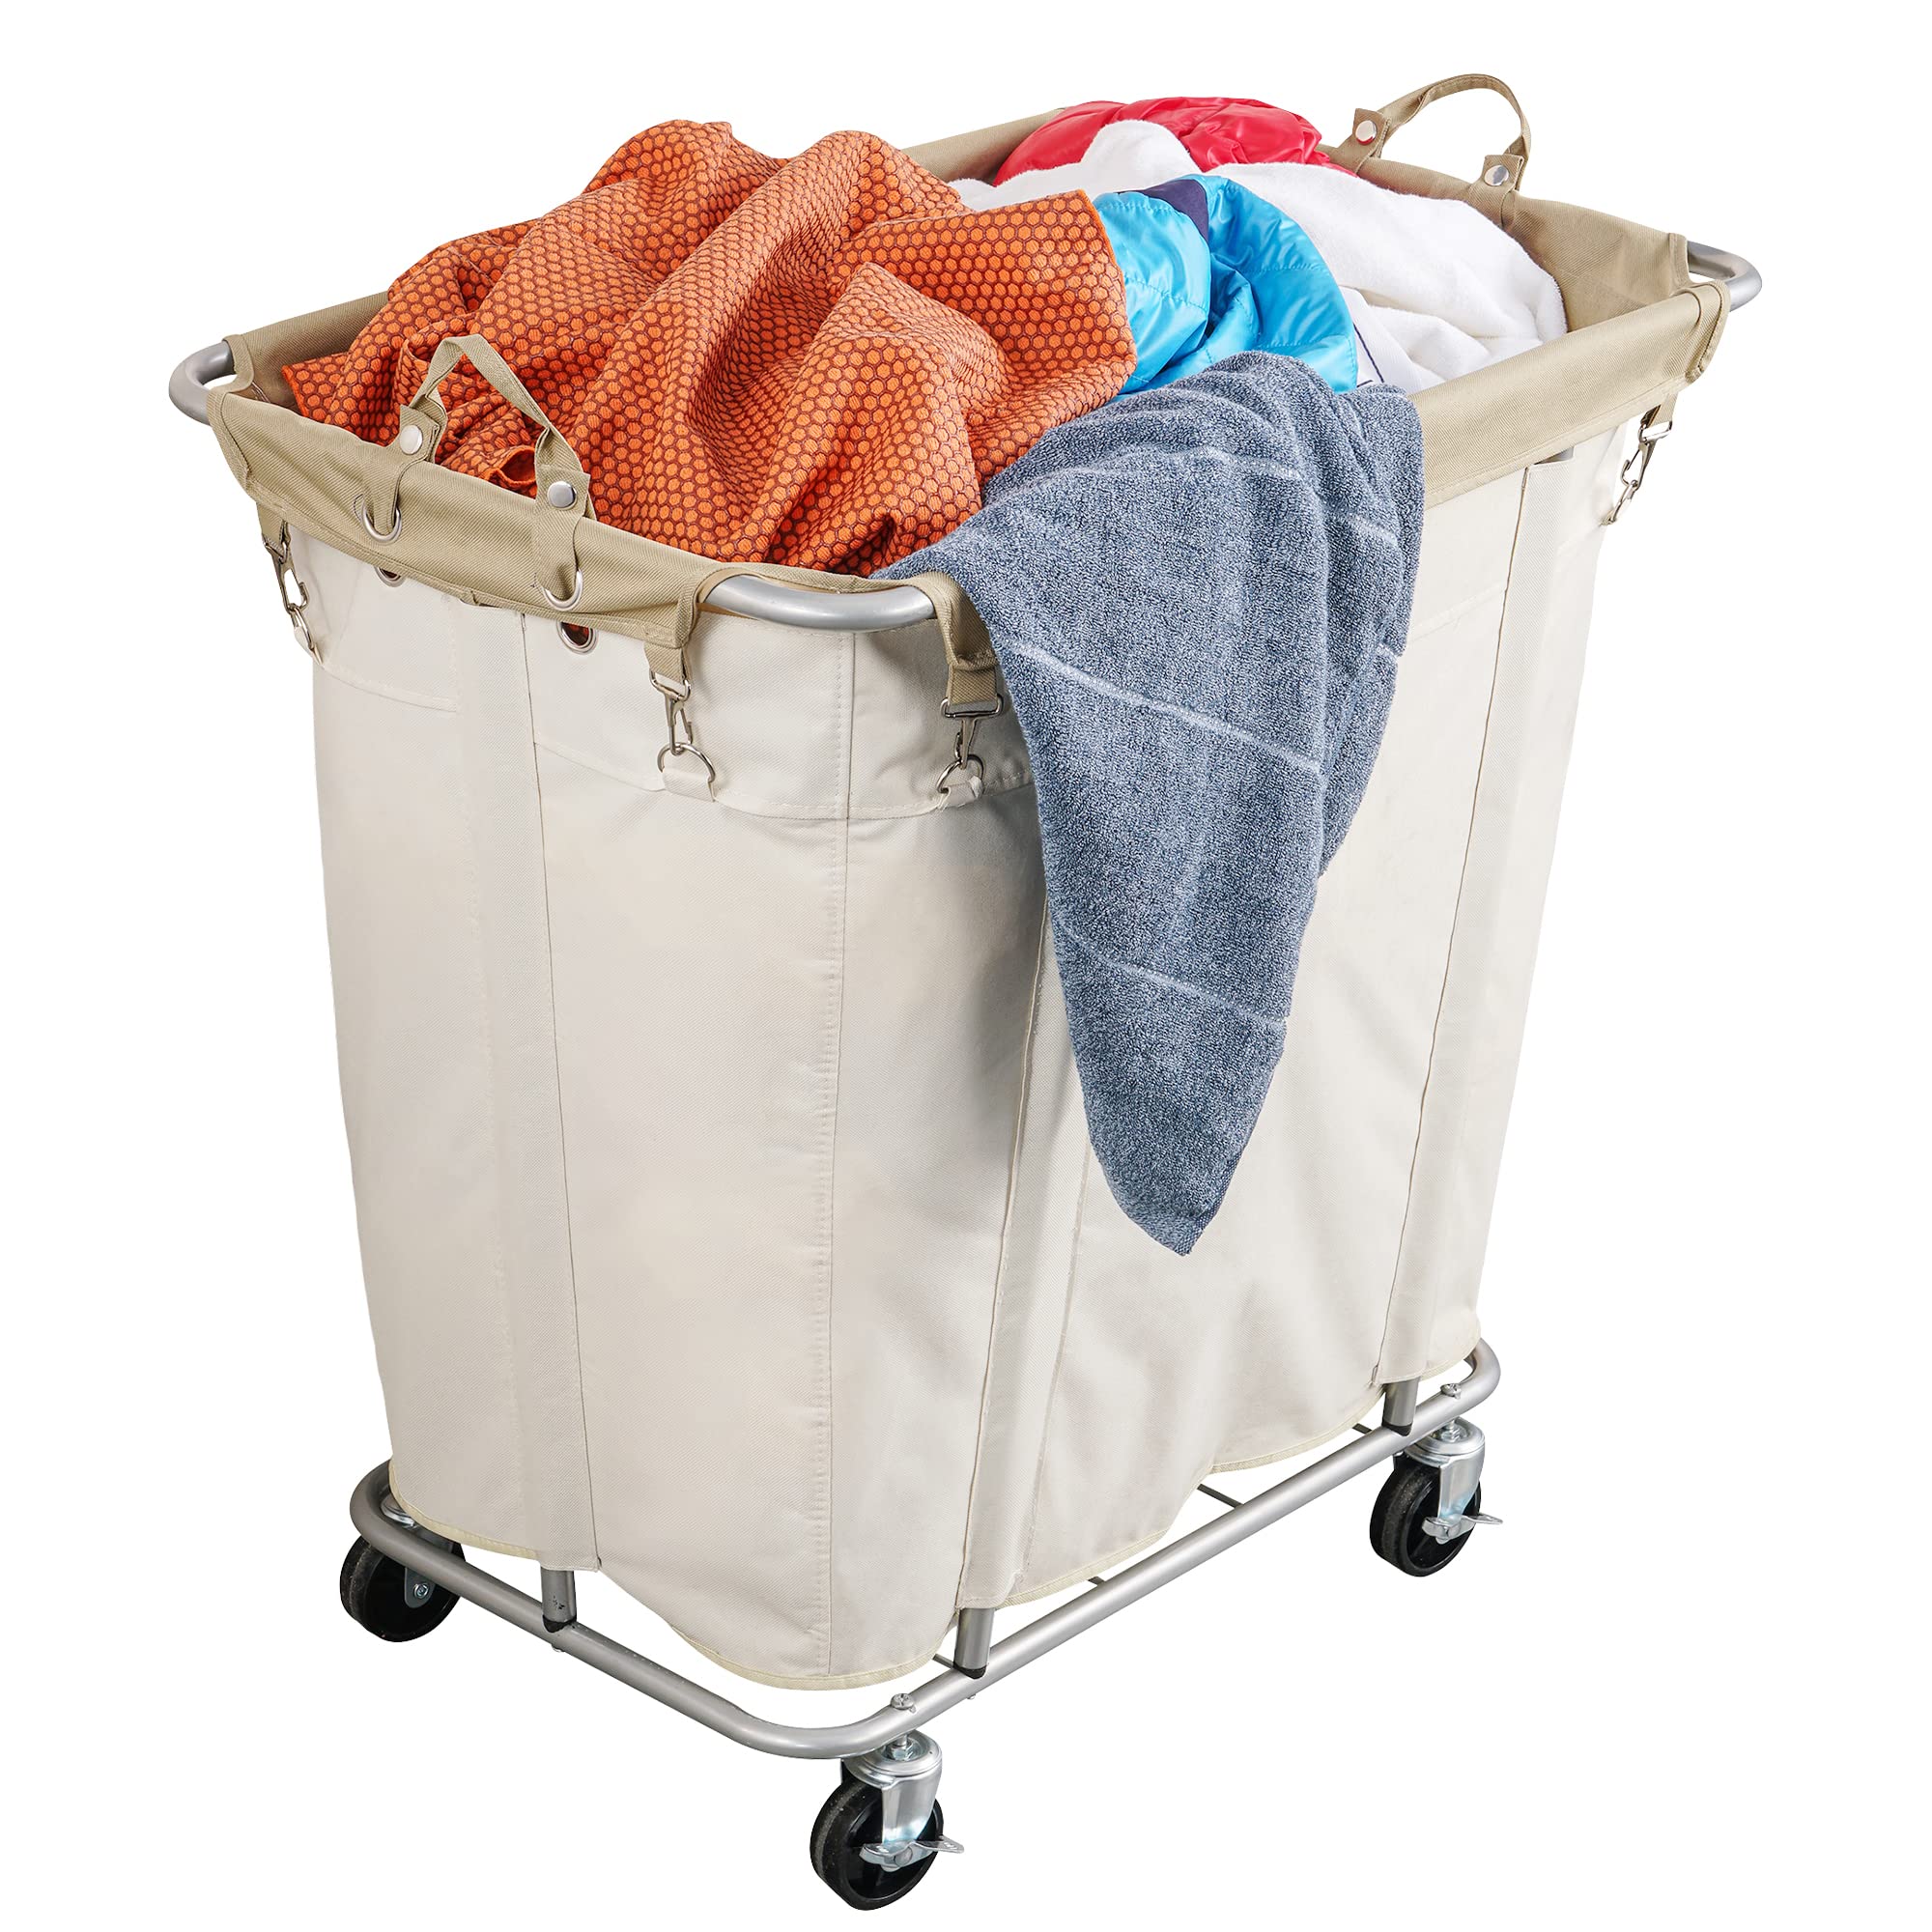 PLKOW Laundry Cart with Wheels 320L Large Rolling Laundry Cart for Commercial/Home